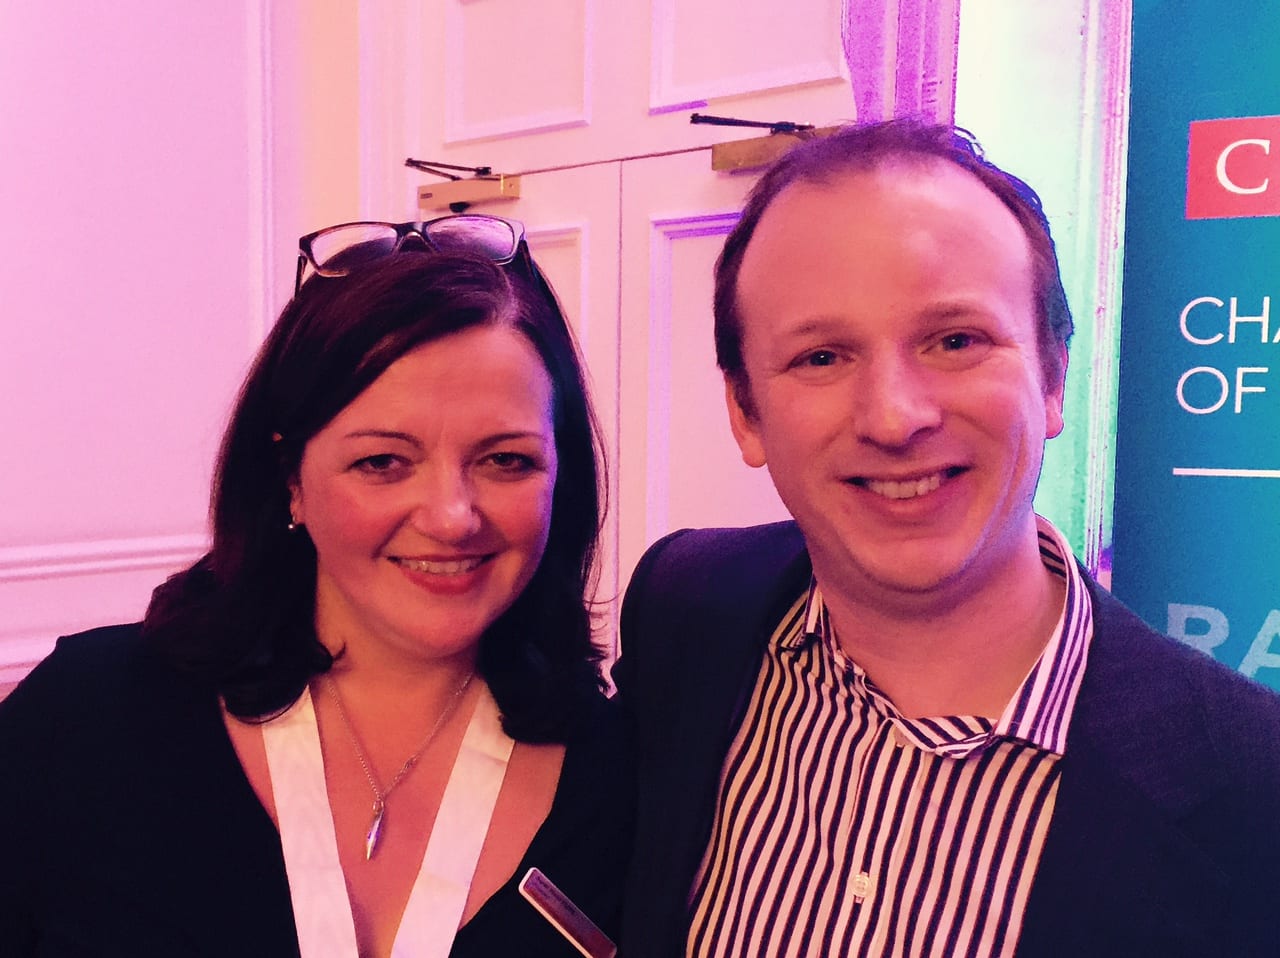 CIPR President Sarah Pinch, and DTW Managing Director Chris Taylor